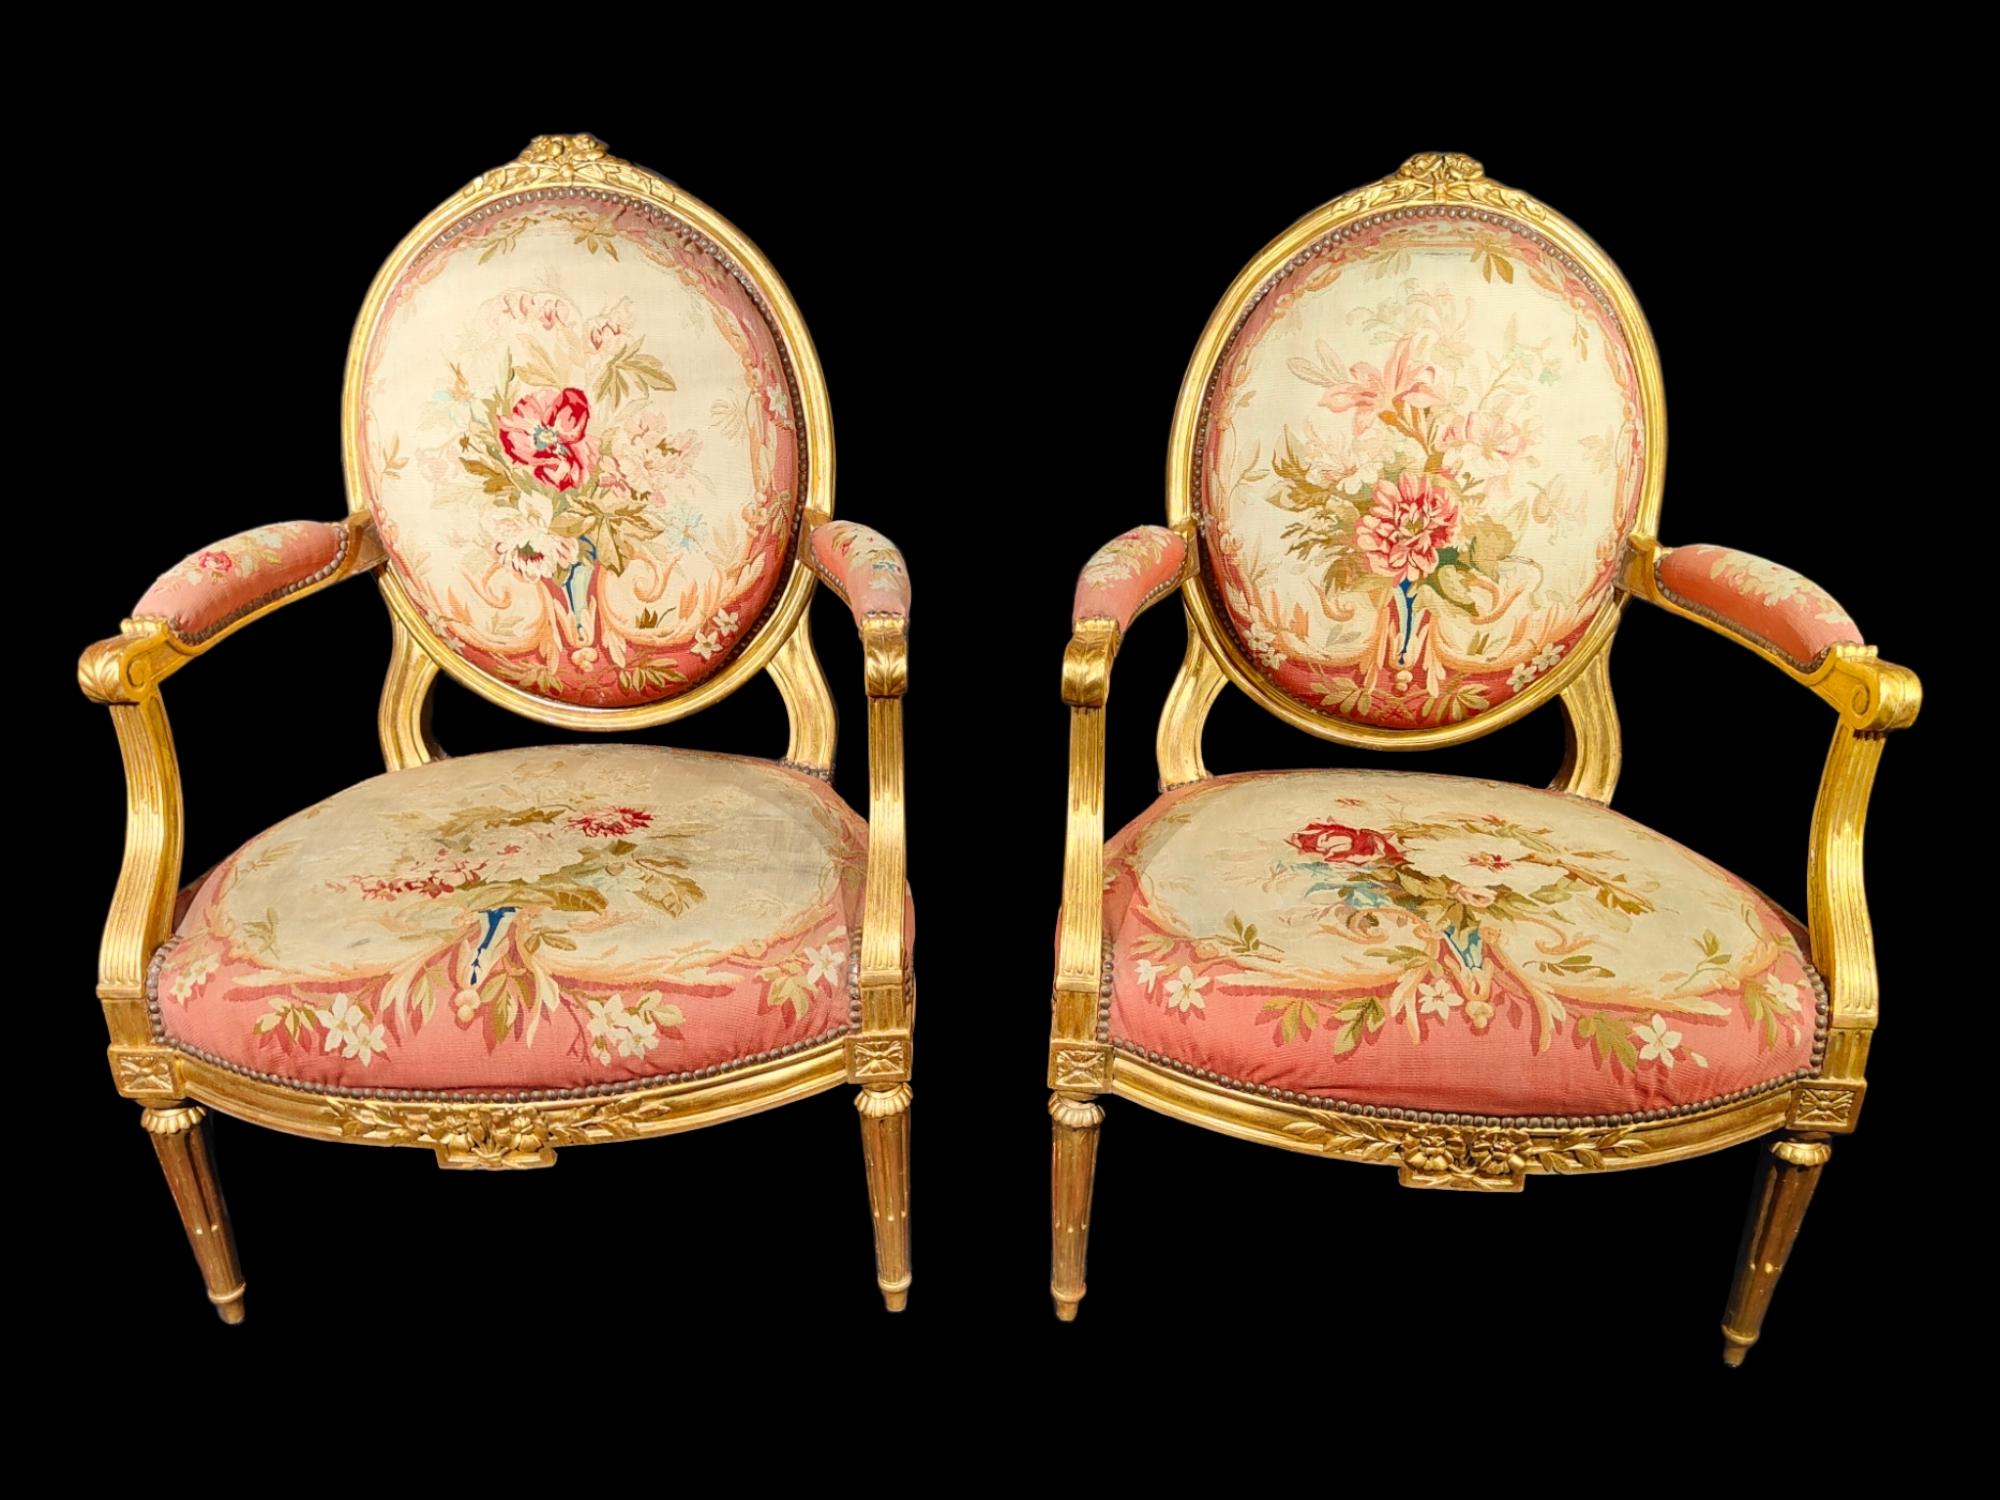 A PAIR OF LOUIS XVI GILTWOOD SEATS,BY CLAUDE CHEVIGNY, CIRCA 1775-80.
A PAIR OF LOUIS XVI GILTWOOD SEATS,BY CLAUDE CHEVIGNY, CIRCA 1775-80.
Both covered in original Beauvais tapestry covers retaining strong original colouring and woven with